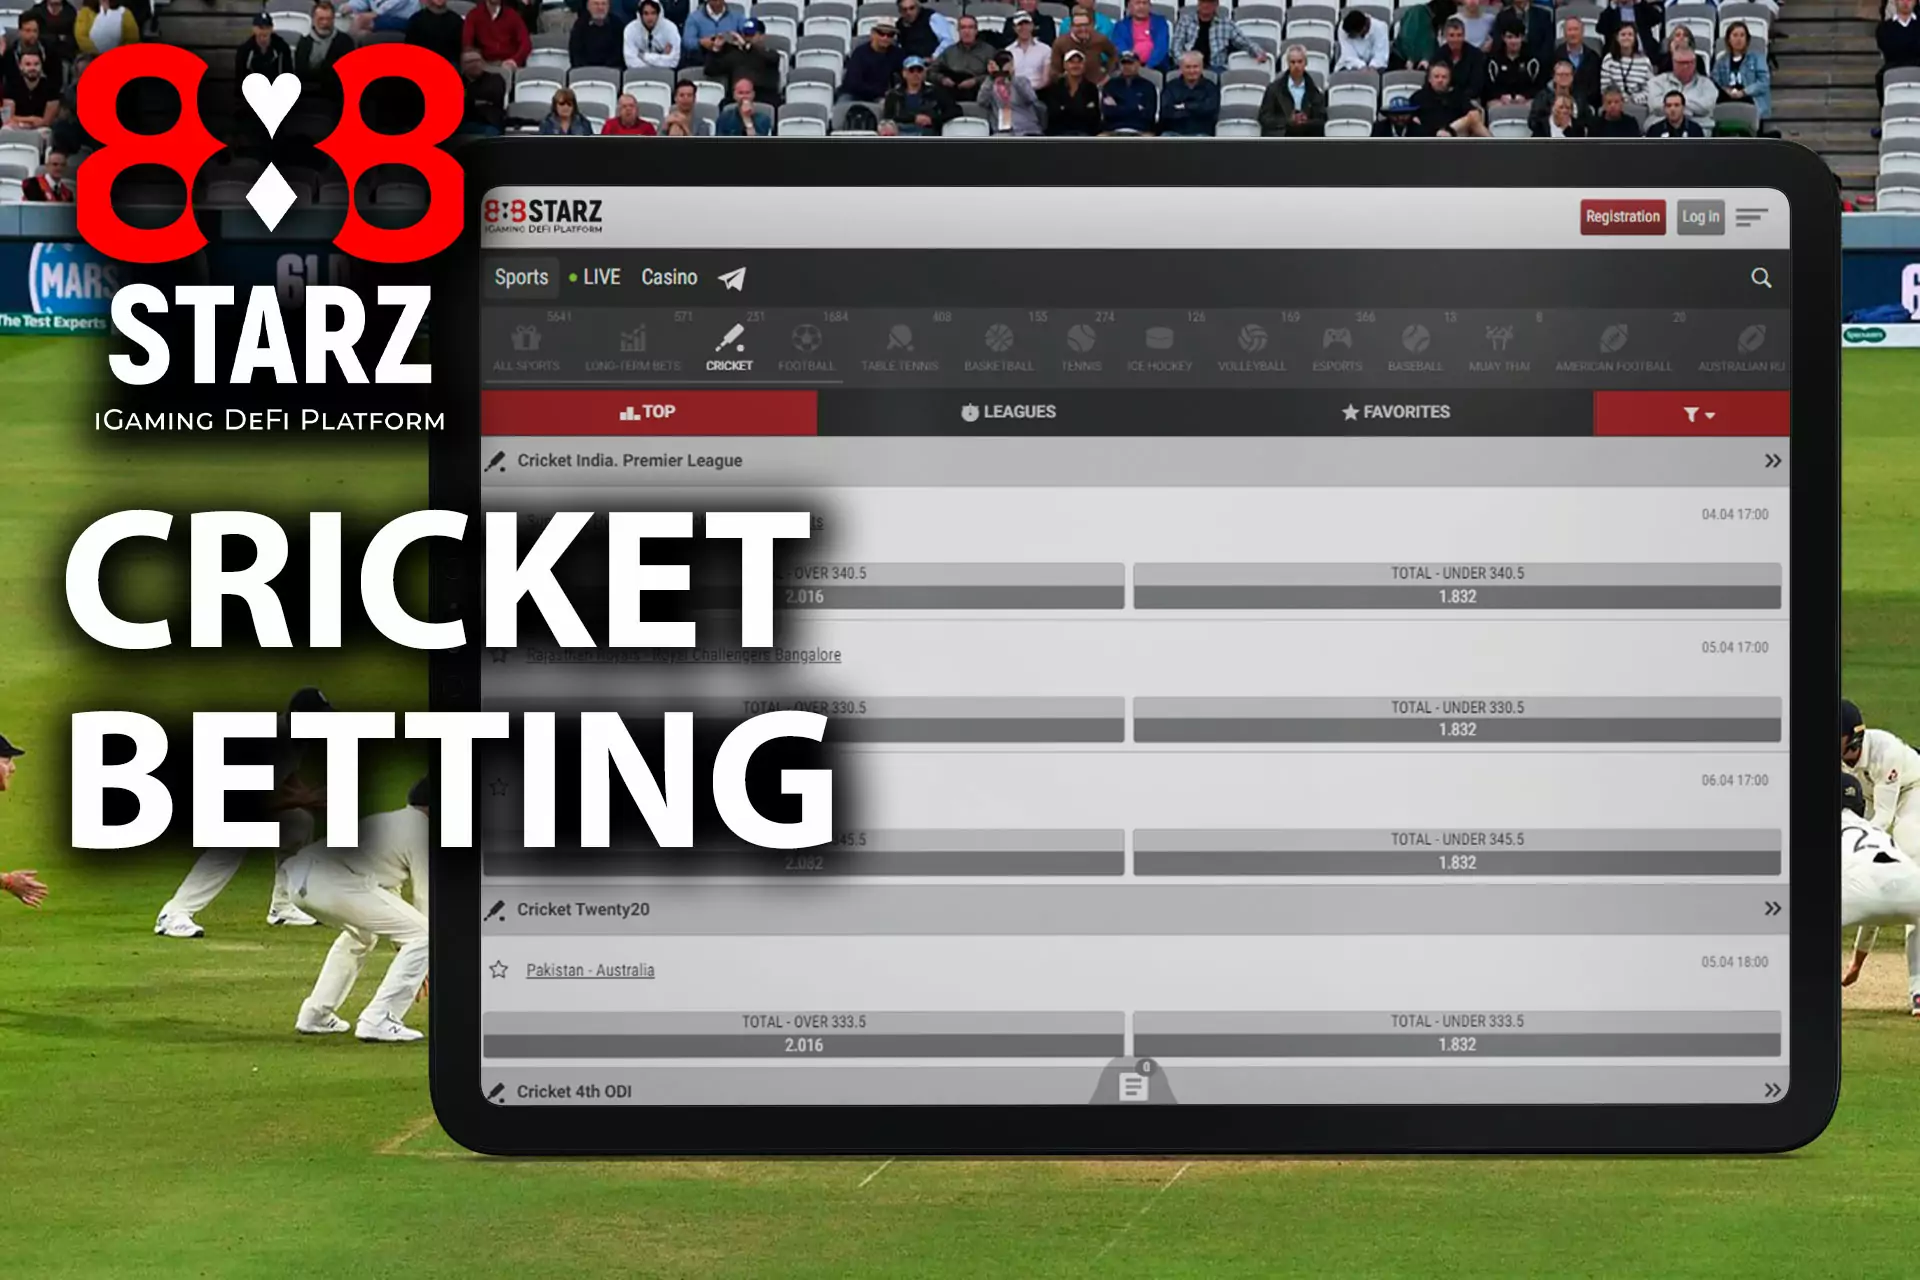 888starz gives you the opportunity to bet on cricket tournaments.